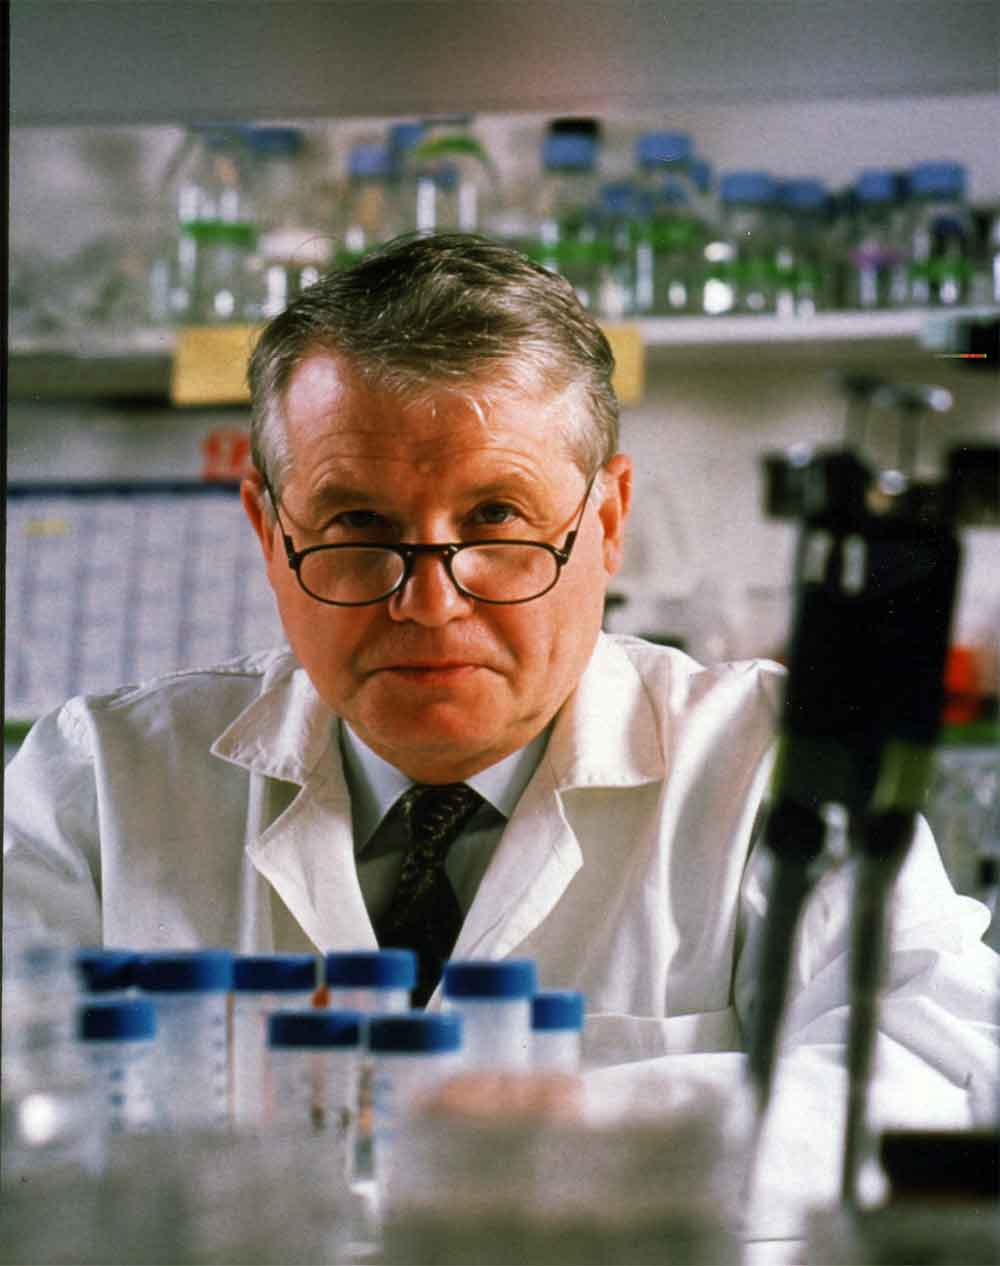 Luc Antoine Montagnier (born 18 August 1932) is a French virologist and joint recipient with Françoise Barré-Sinoussi and Harald zur Hausen of the 2008 Nobel Prize in Physiology or Medicine for his discovery of the human immunodeficiency virus (HIV)